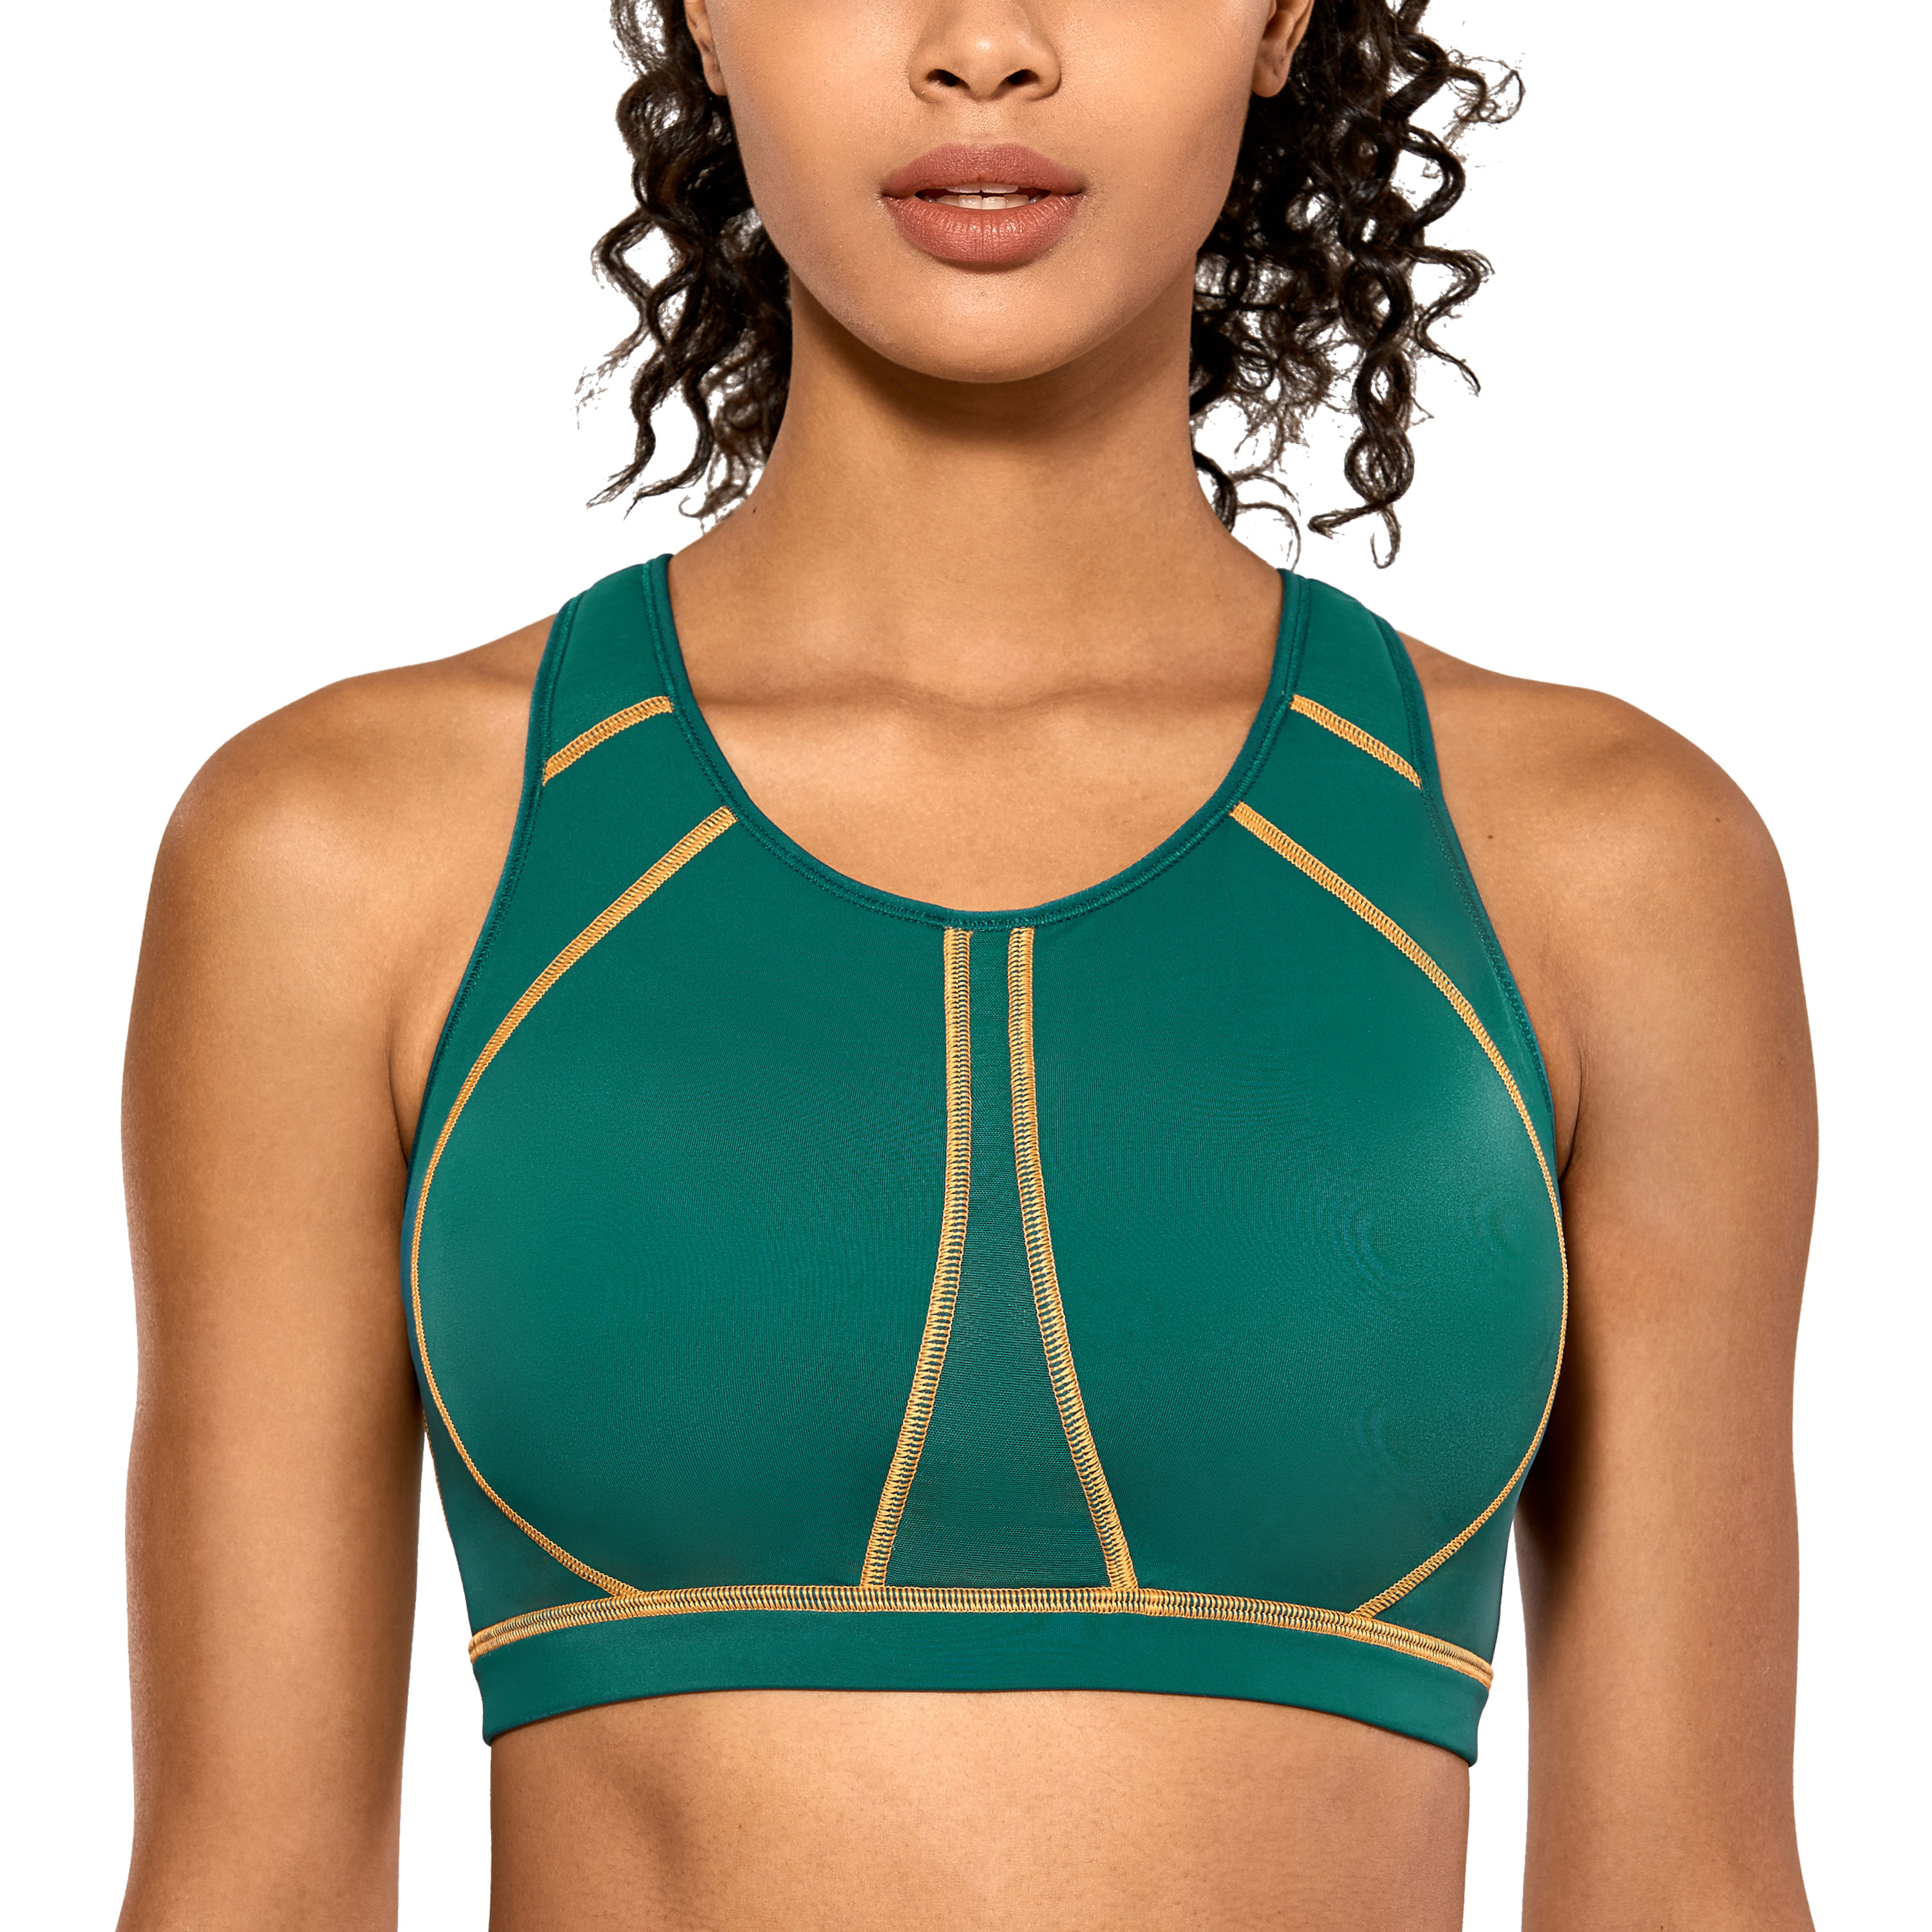 SYROKAN Women's Full Support Racerback Lightly Lined Underwire